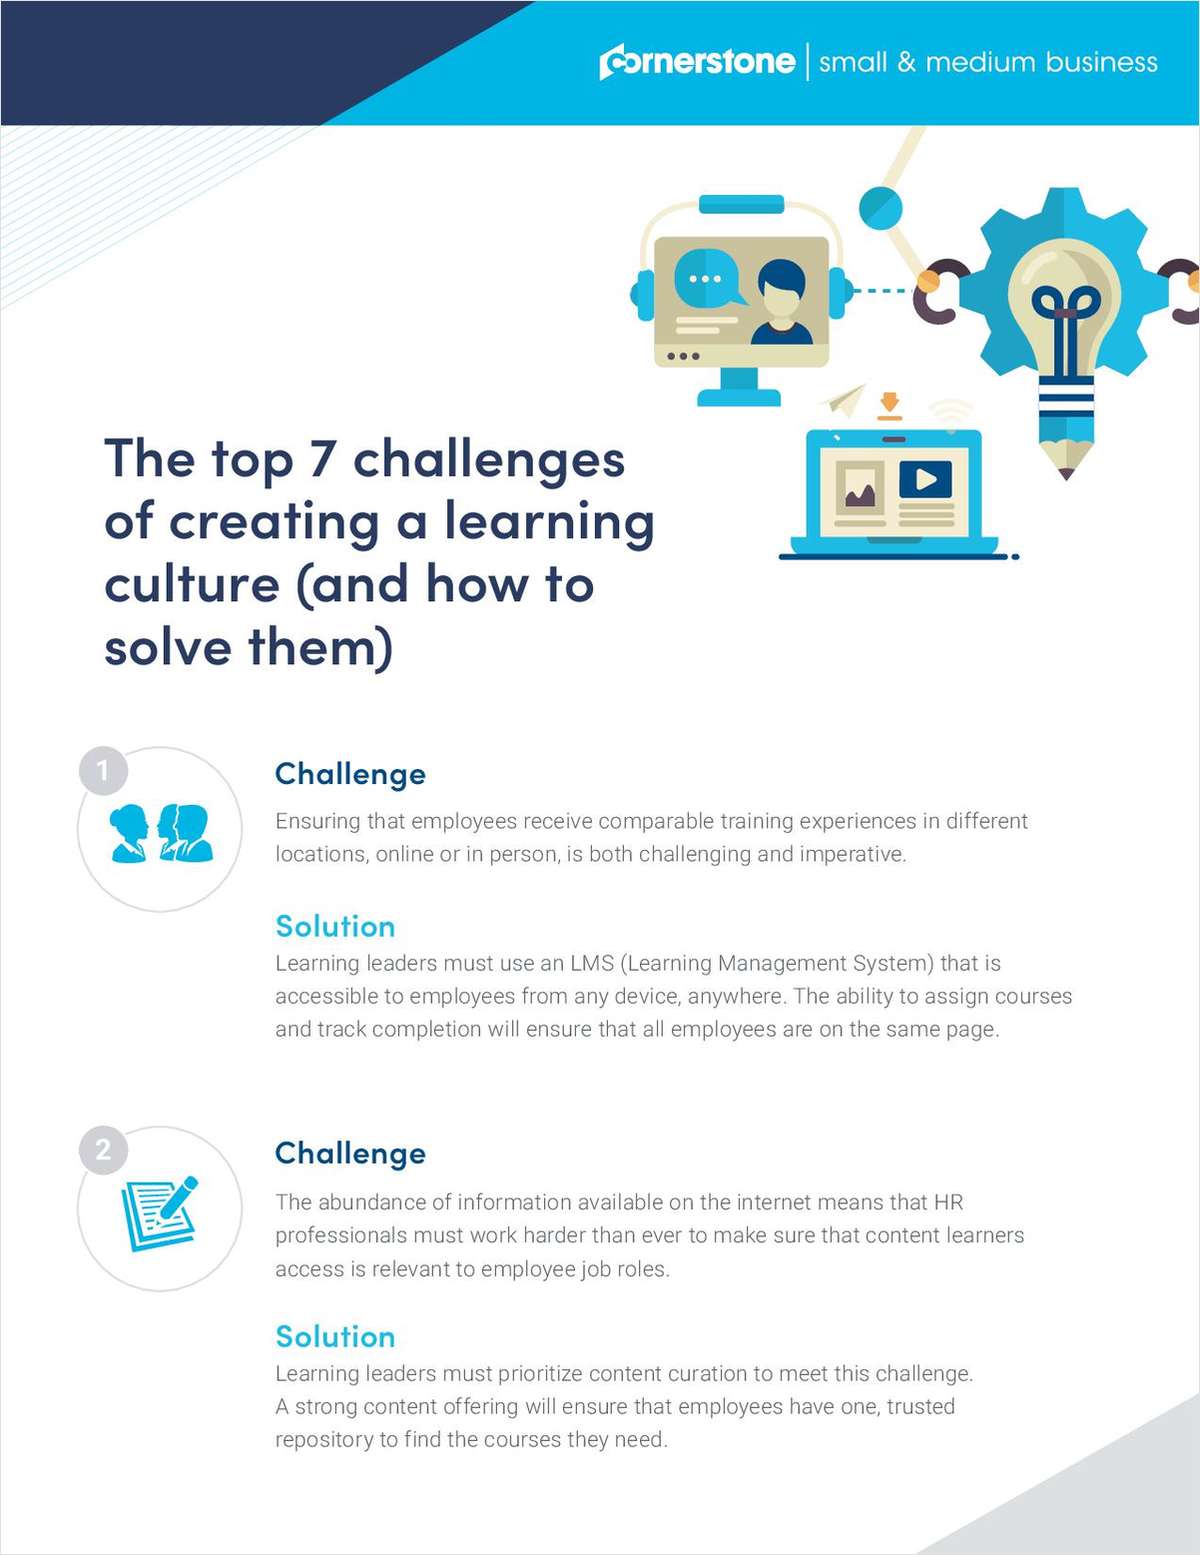 The Top 7 Challenges Of Creating A Learning Culture (And How To Solve Them)